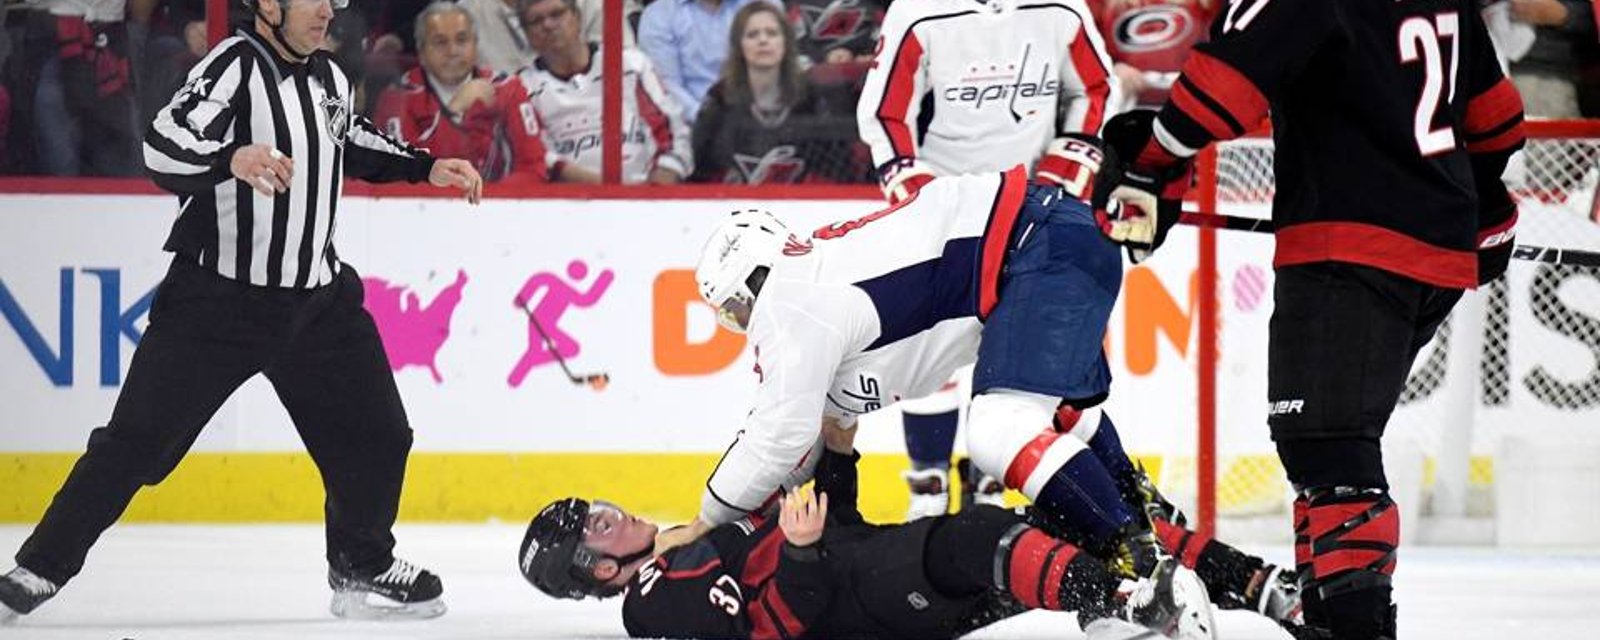 Ovechkin has a message for KOed Svechnikov as teams face off Thursday in pivotal Game 4